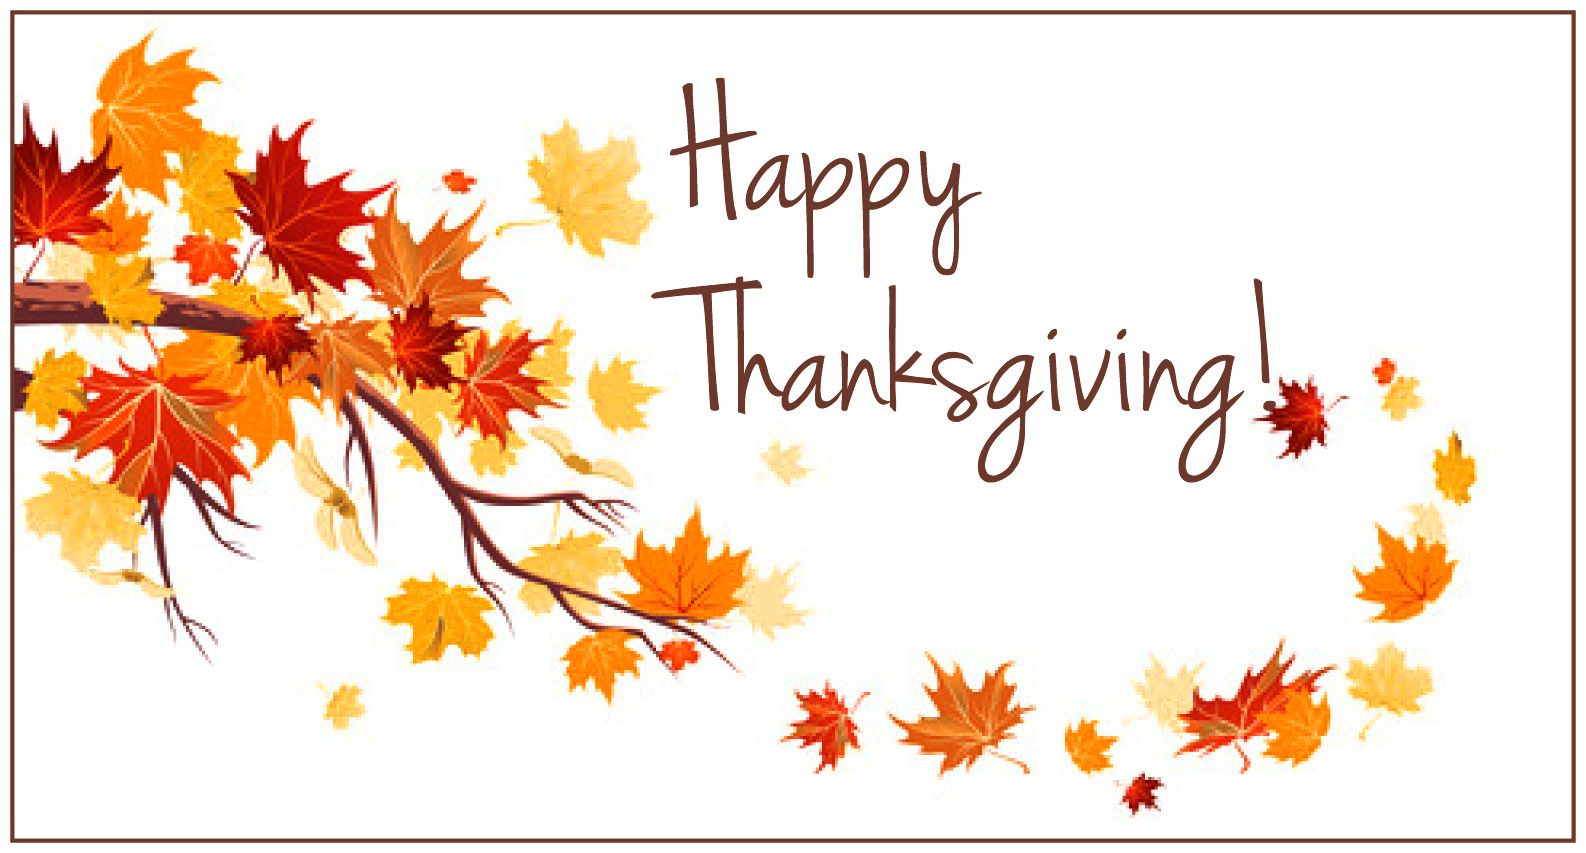 Happy thanksgiving day 2016 clip arts download free images, wallpapers day, examples of